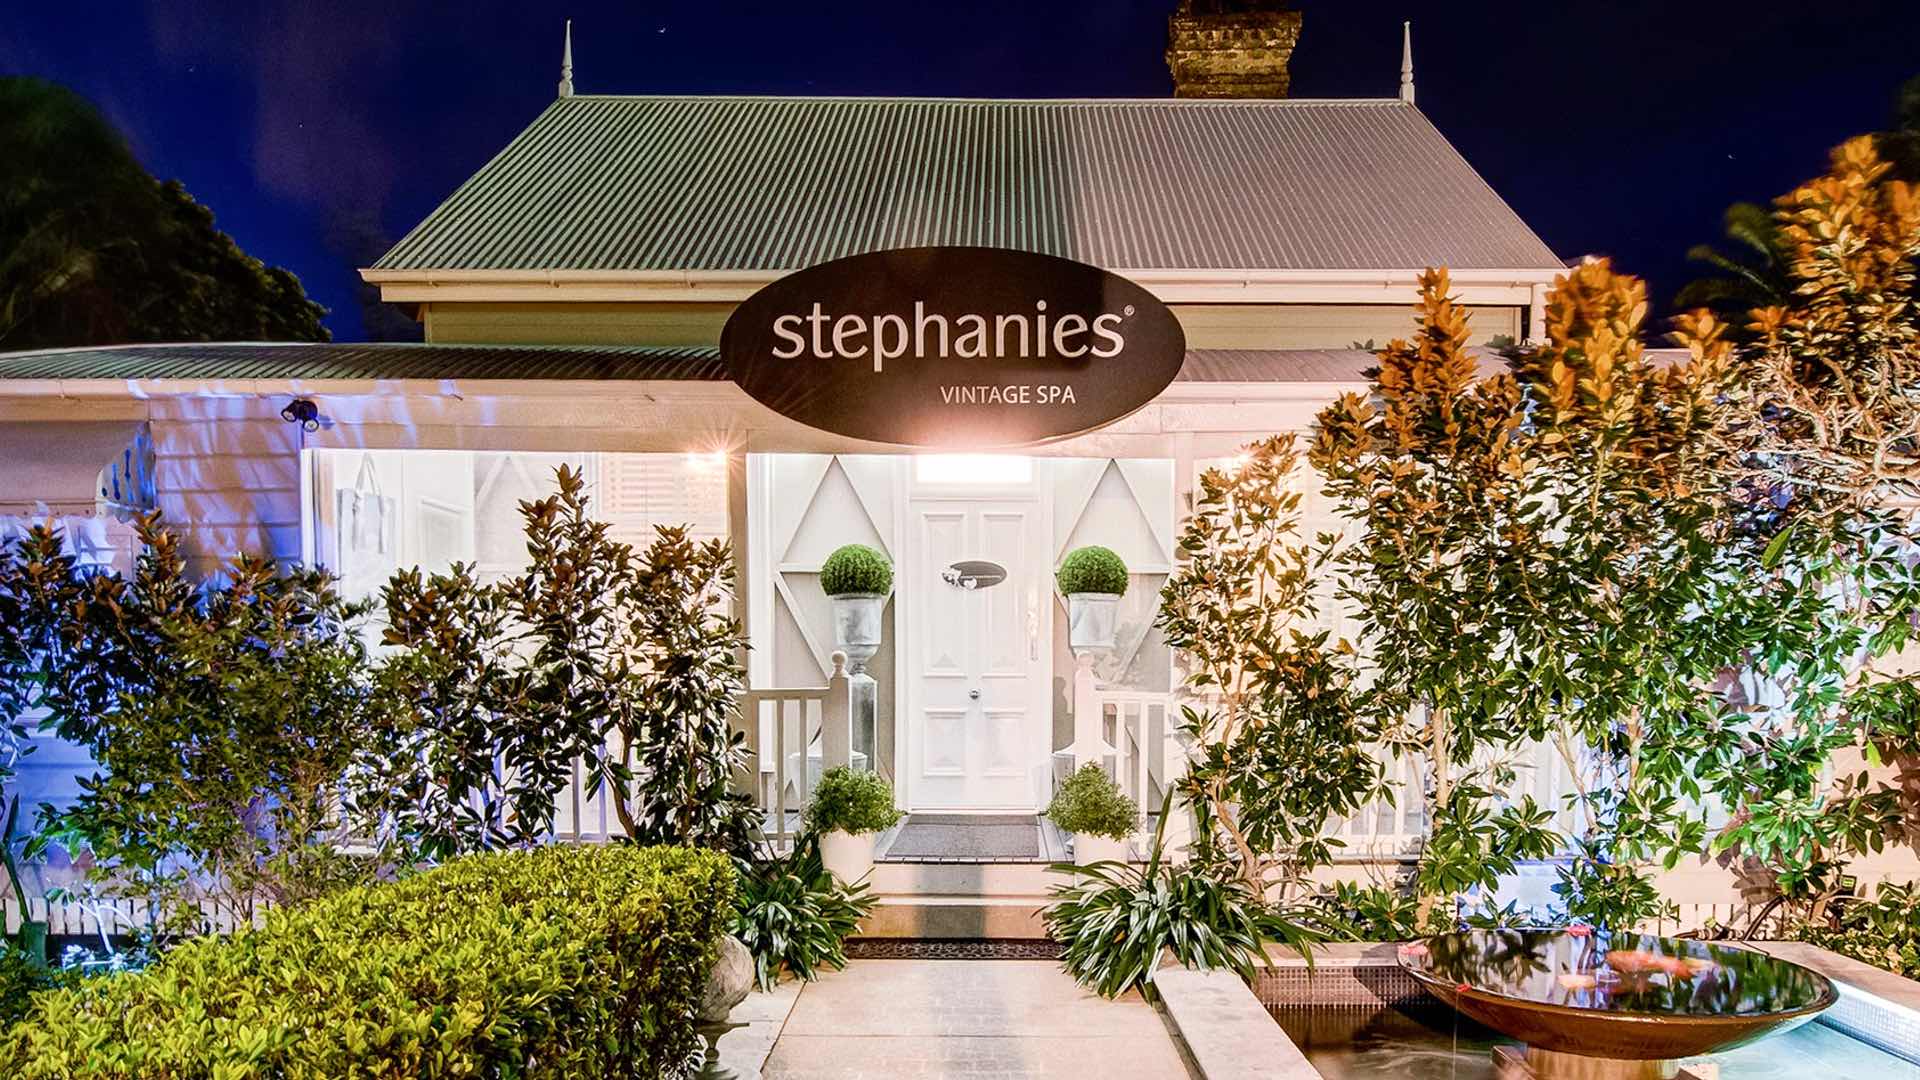 The entrance to Stephanie's Vintage Day Spa - one of the best spas in brisbane.